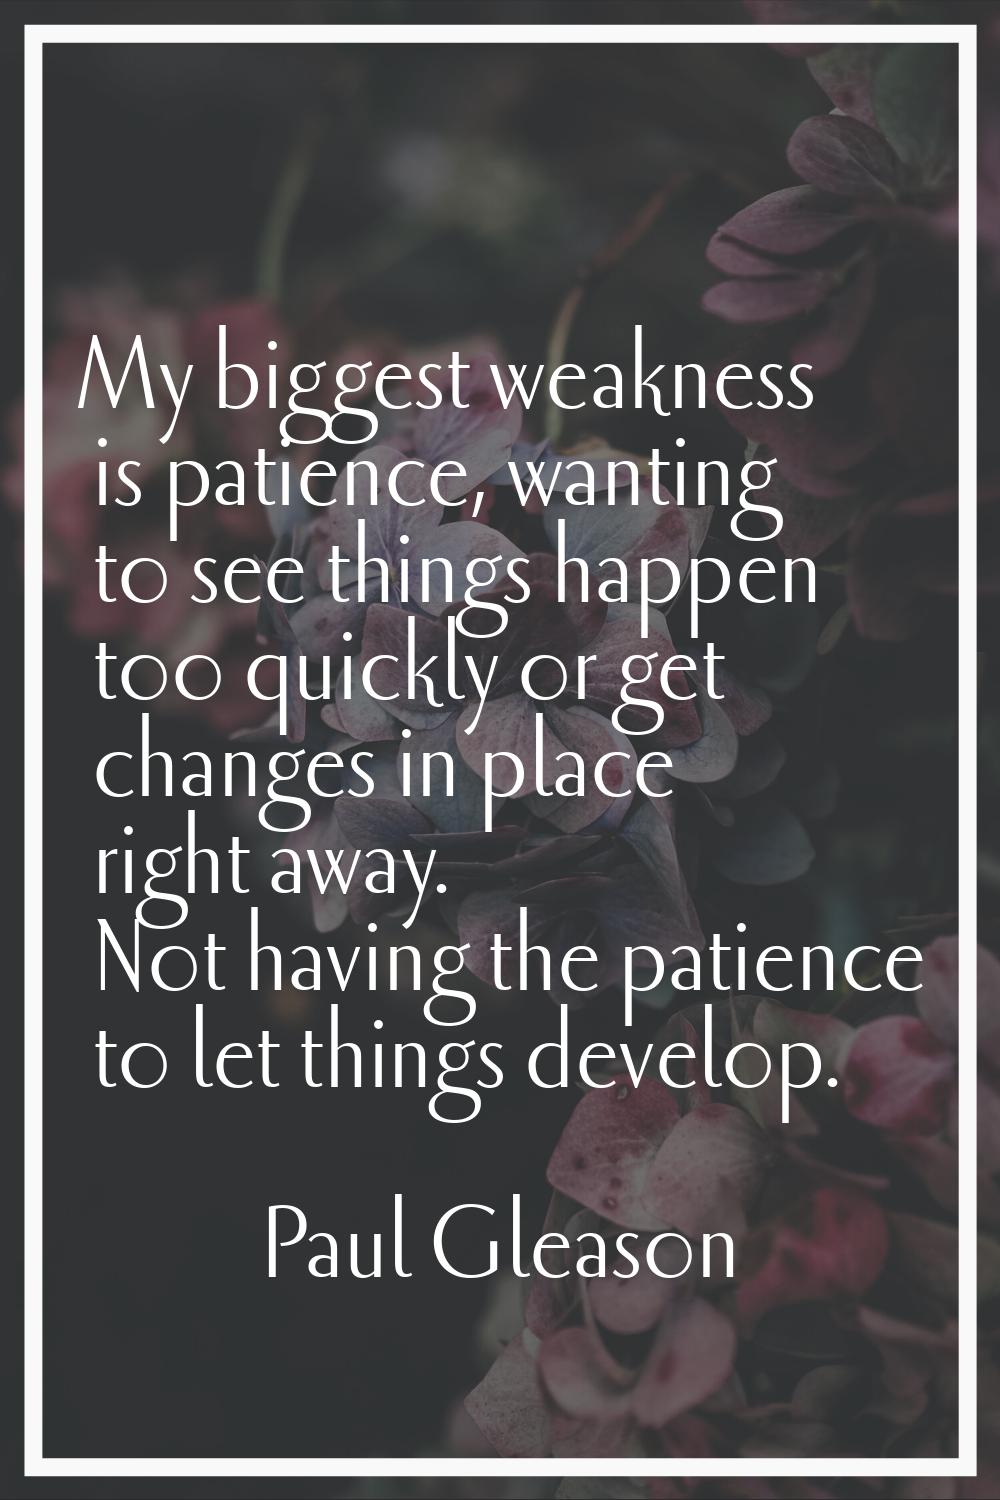 My biggest weakness is patience, wanting to see things happen too quickly or get changes in place r